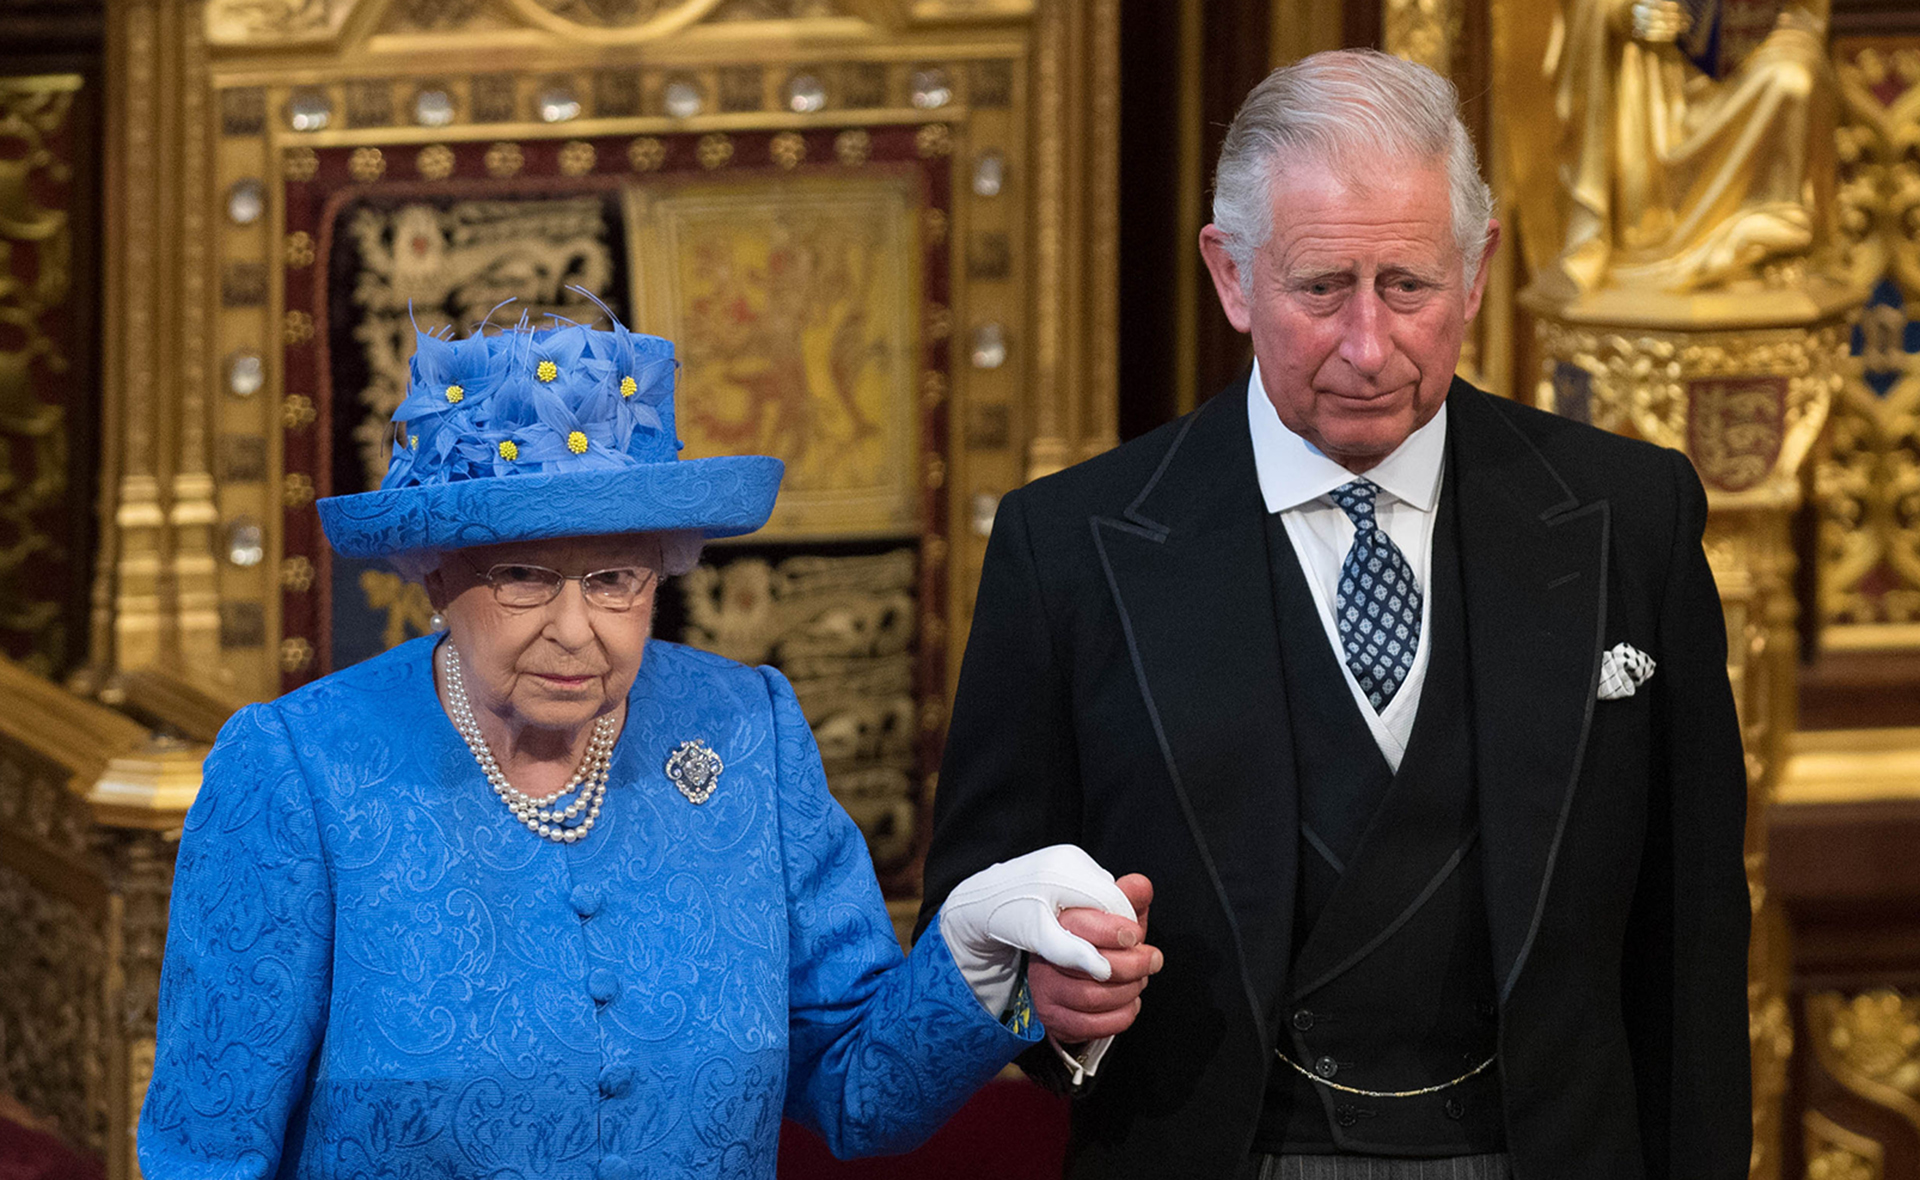 Prince Charles tests positive for COVID-19 a second time, days after reportedly meeting with the Queen at Windsor